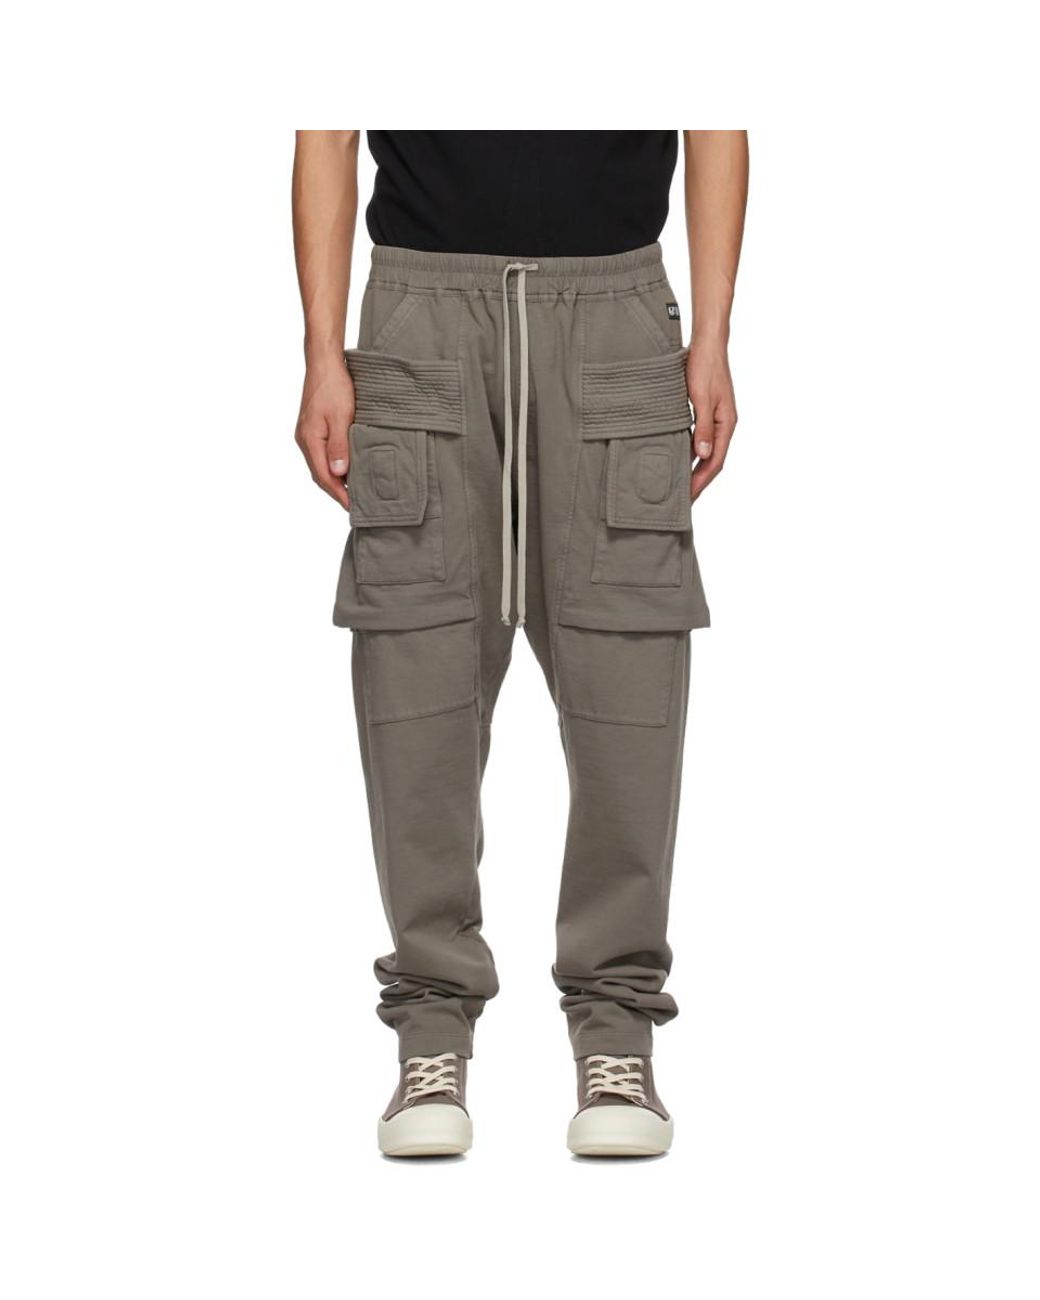 Rick Owens Drkshdw Cotton Grey Creatch Cargo Pants in Gray for Men - Lyst